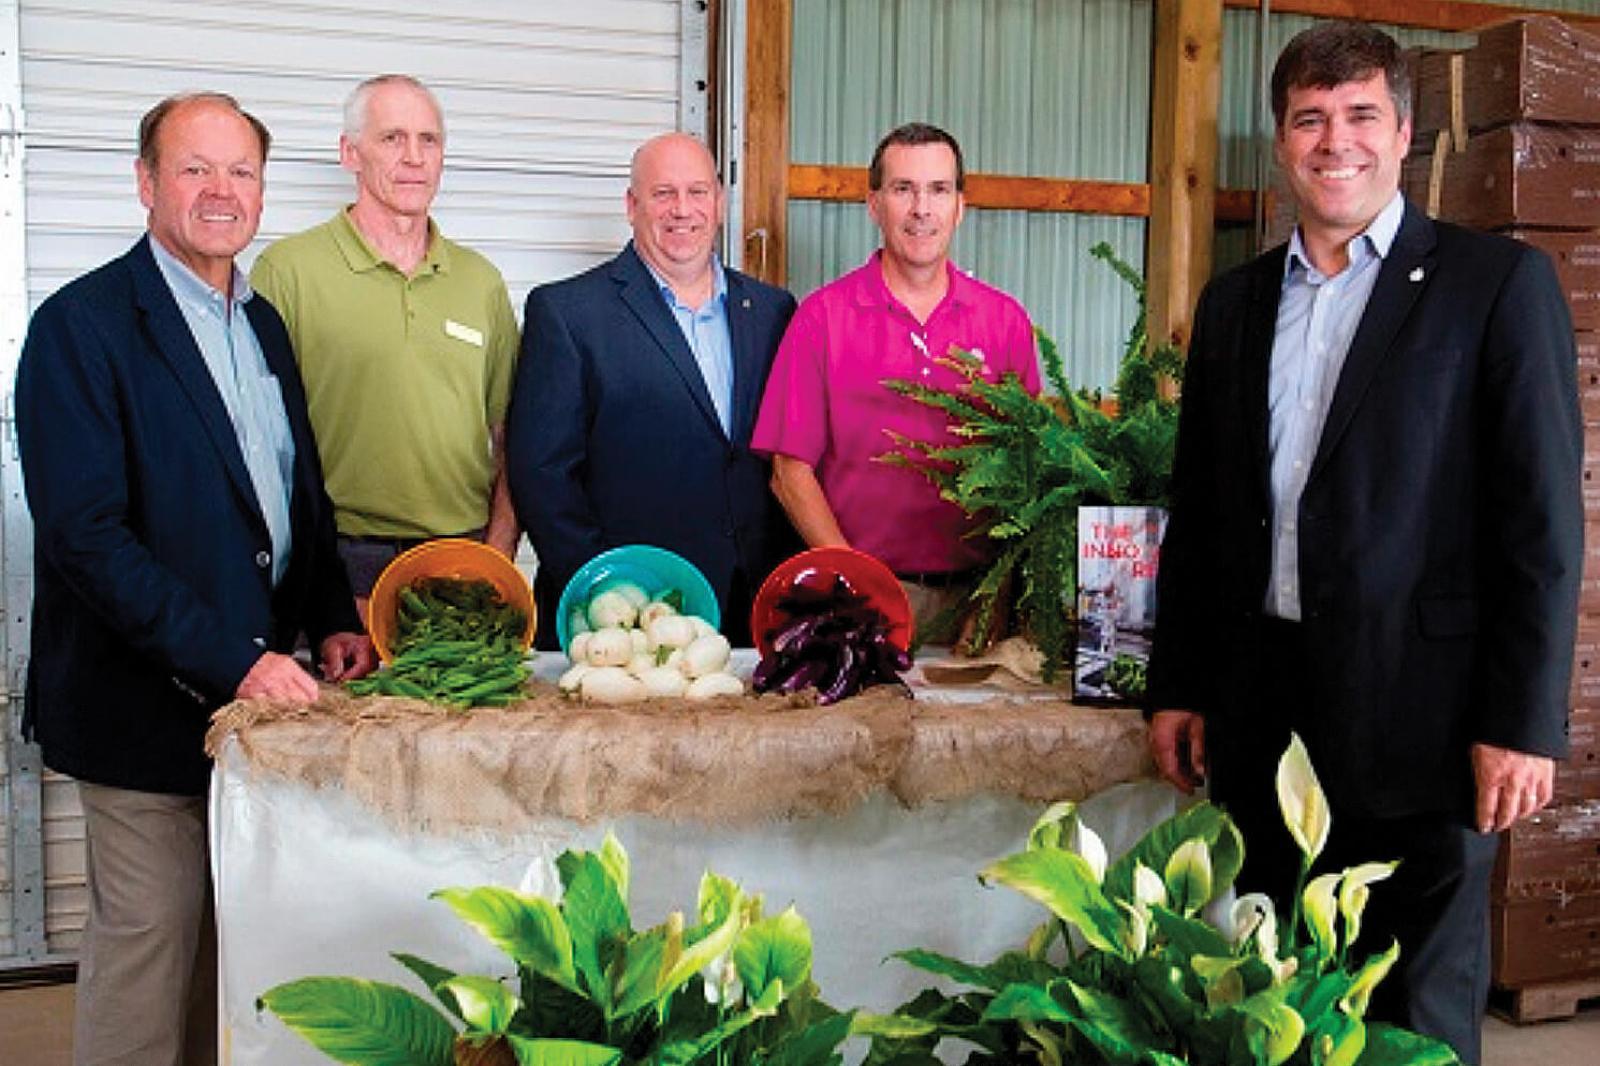 From left: John F.T. Scott, Chair, Vineland’s Board of Directors; Dr. Michael Brownbridge, Research Director, Horticultural Production Systems at Vineland; Dean Allison, member of Parliament for Niagara West—Glanbrook; Dr. Daryl Somers, Research Director, Applied Genomics at Vineland; Pierre Lemieux, Parliamentary Secretary to Agriculture Minister Gerry Ritz.